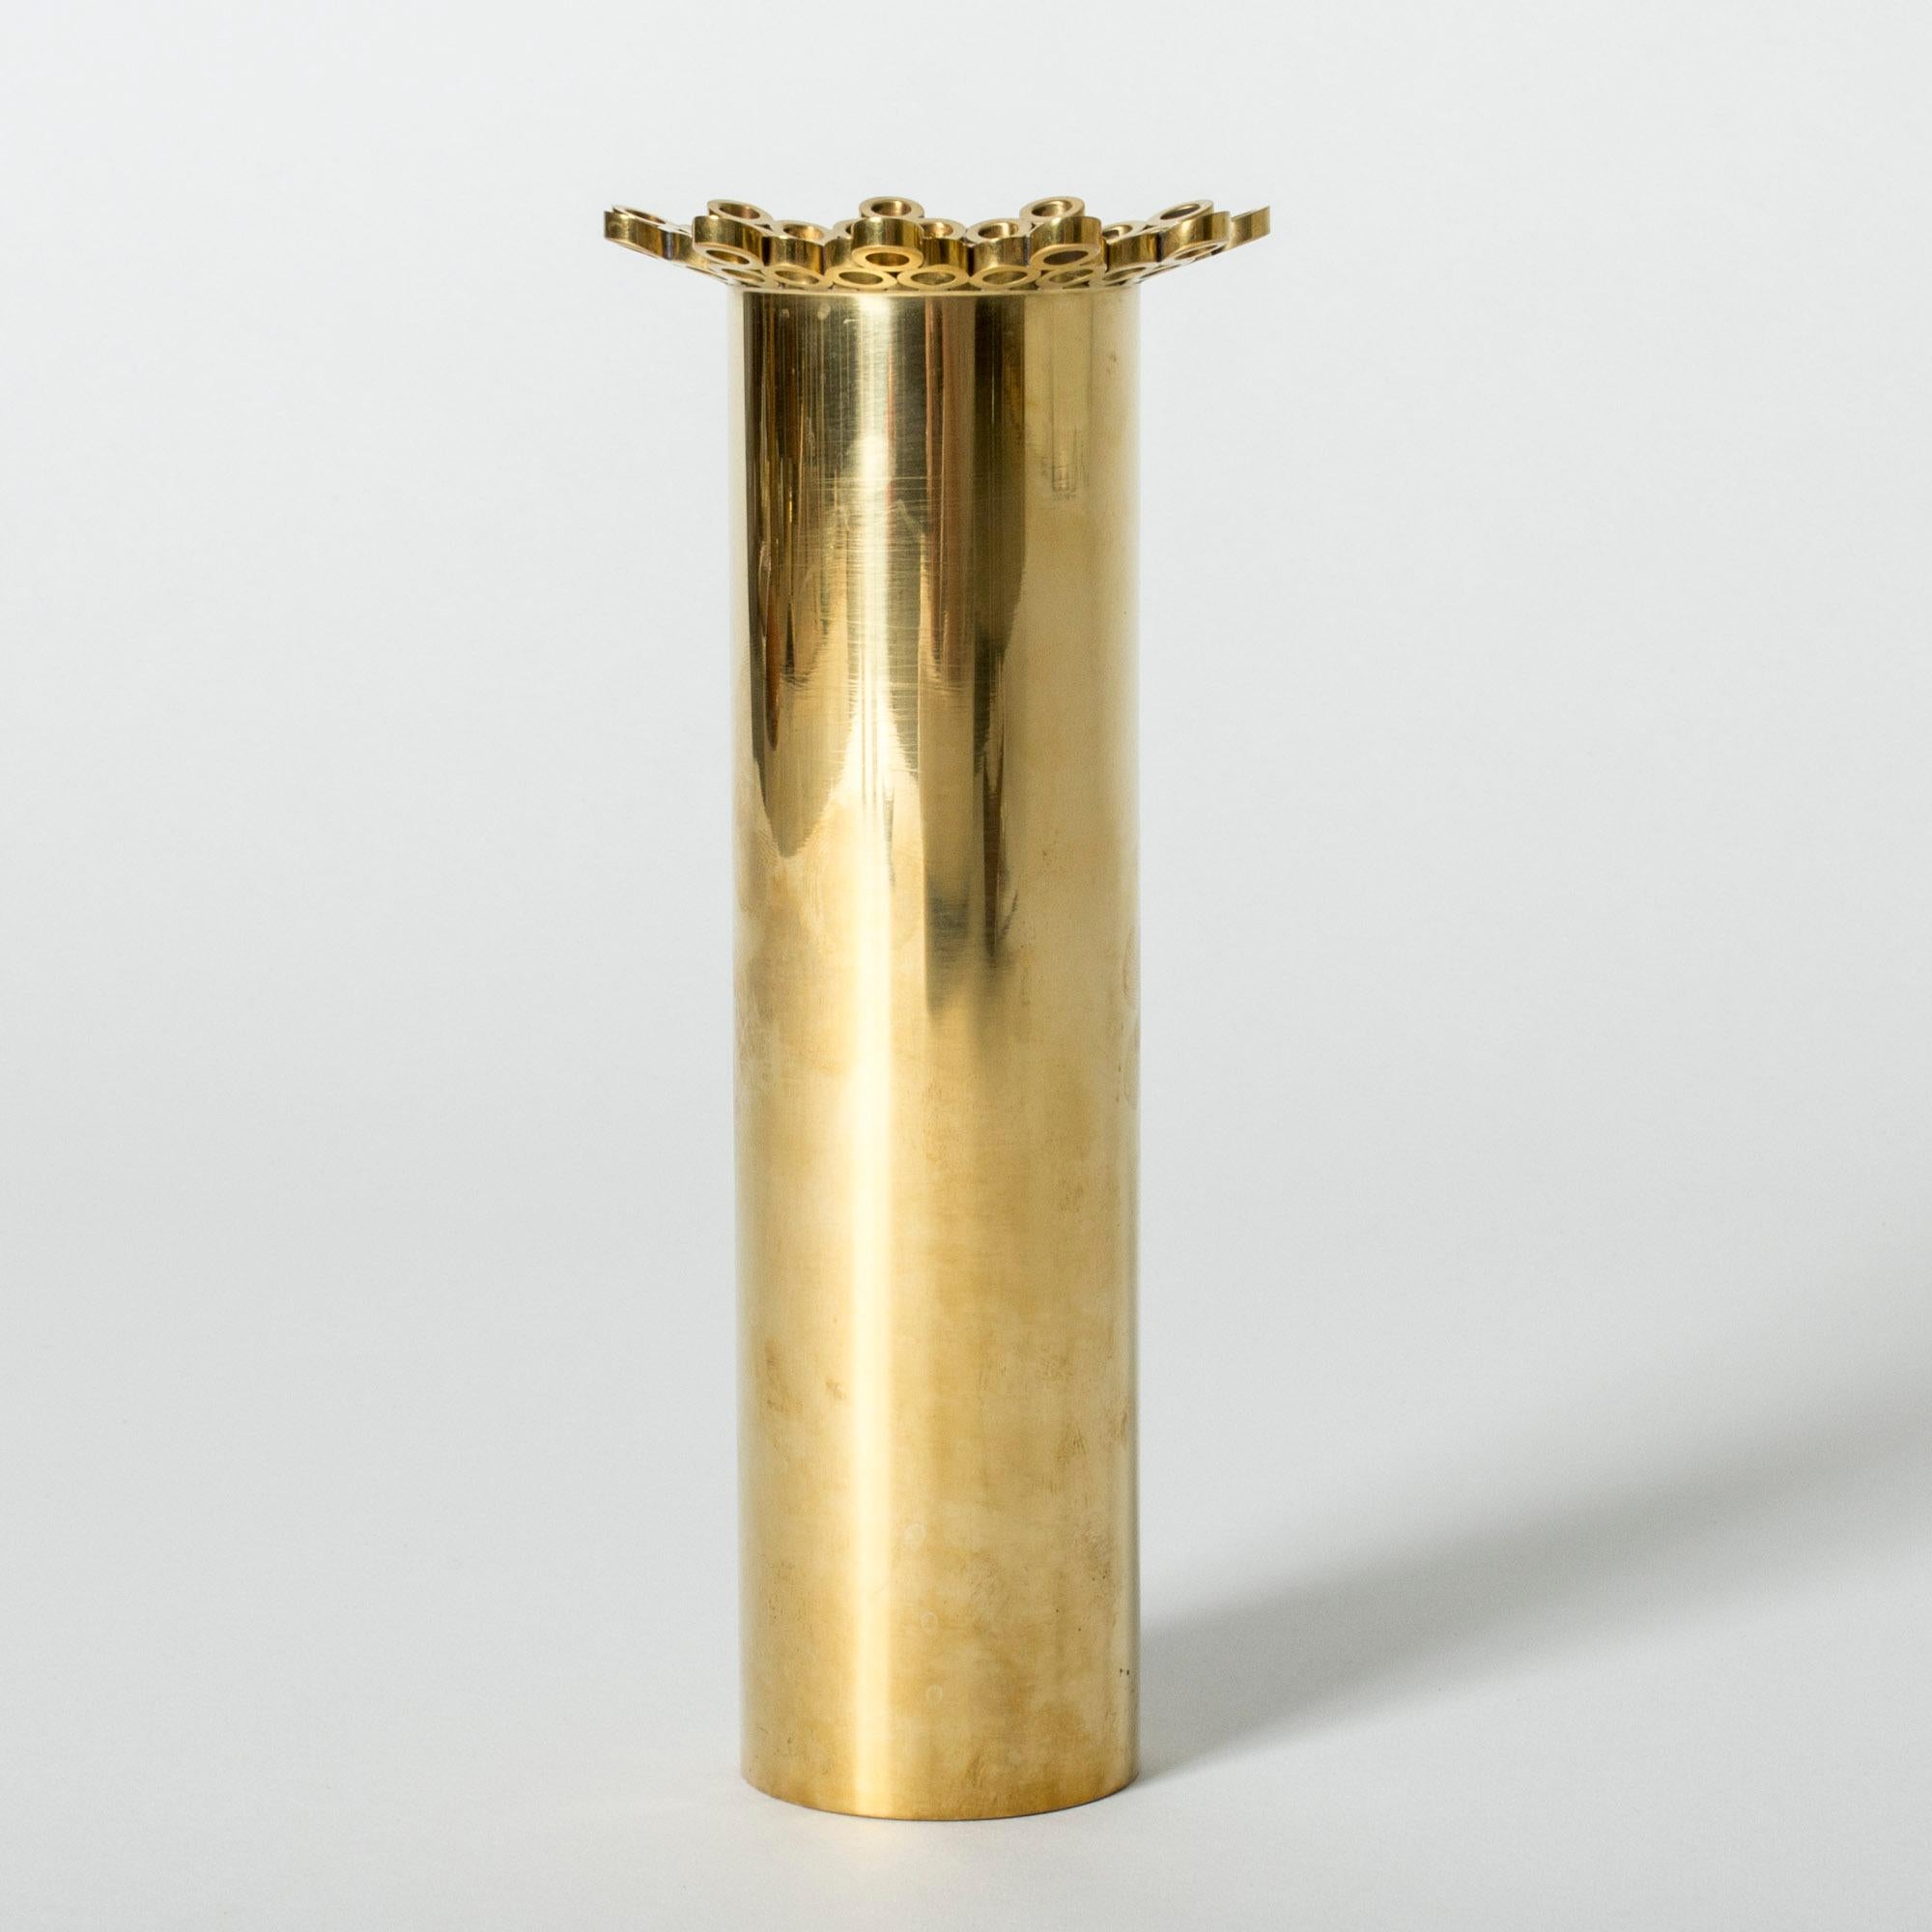 Tall brass vase by Pierre Forssell, with a cool frill of hoops around the rim.